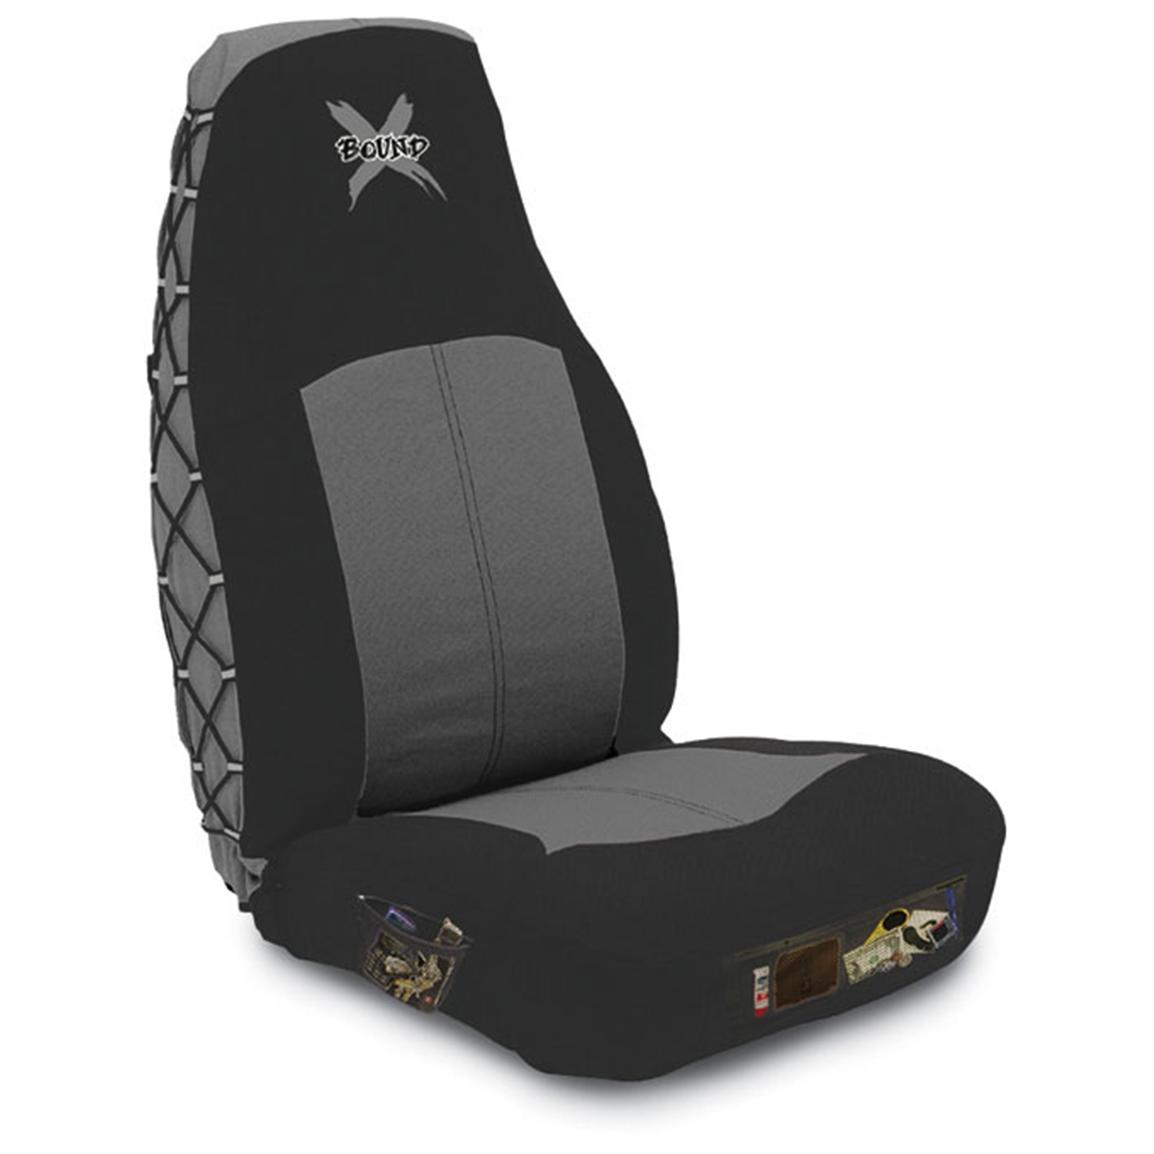 X-Bound Bucket Seat Cover - 75840, Seat Covers at Sportsman's Guide